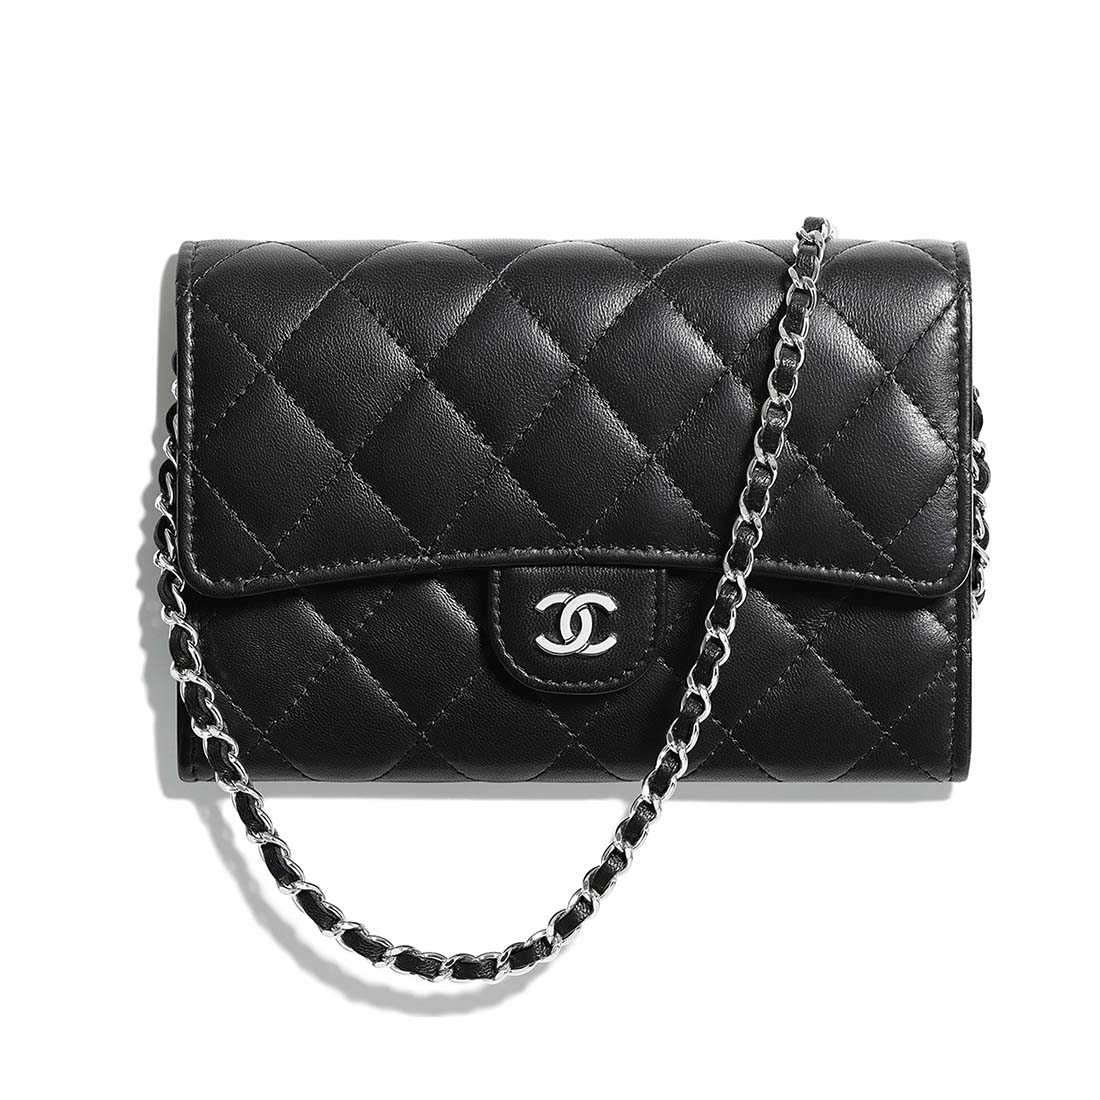 Chanel Women Classic Clutch with Chain in Lambskin Leather-Black - LULUX